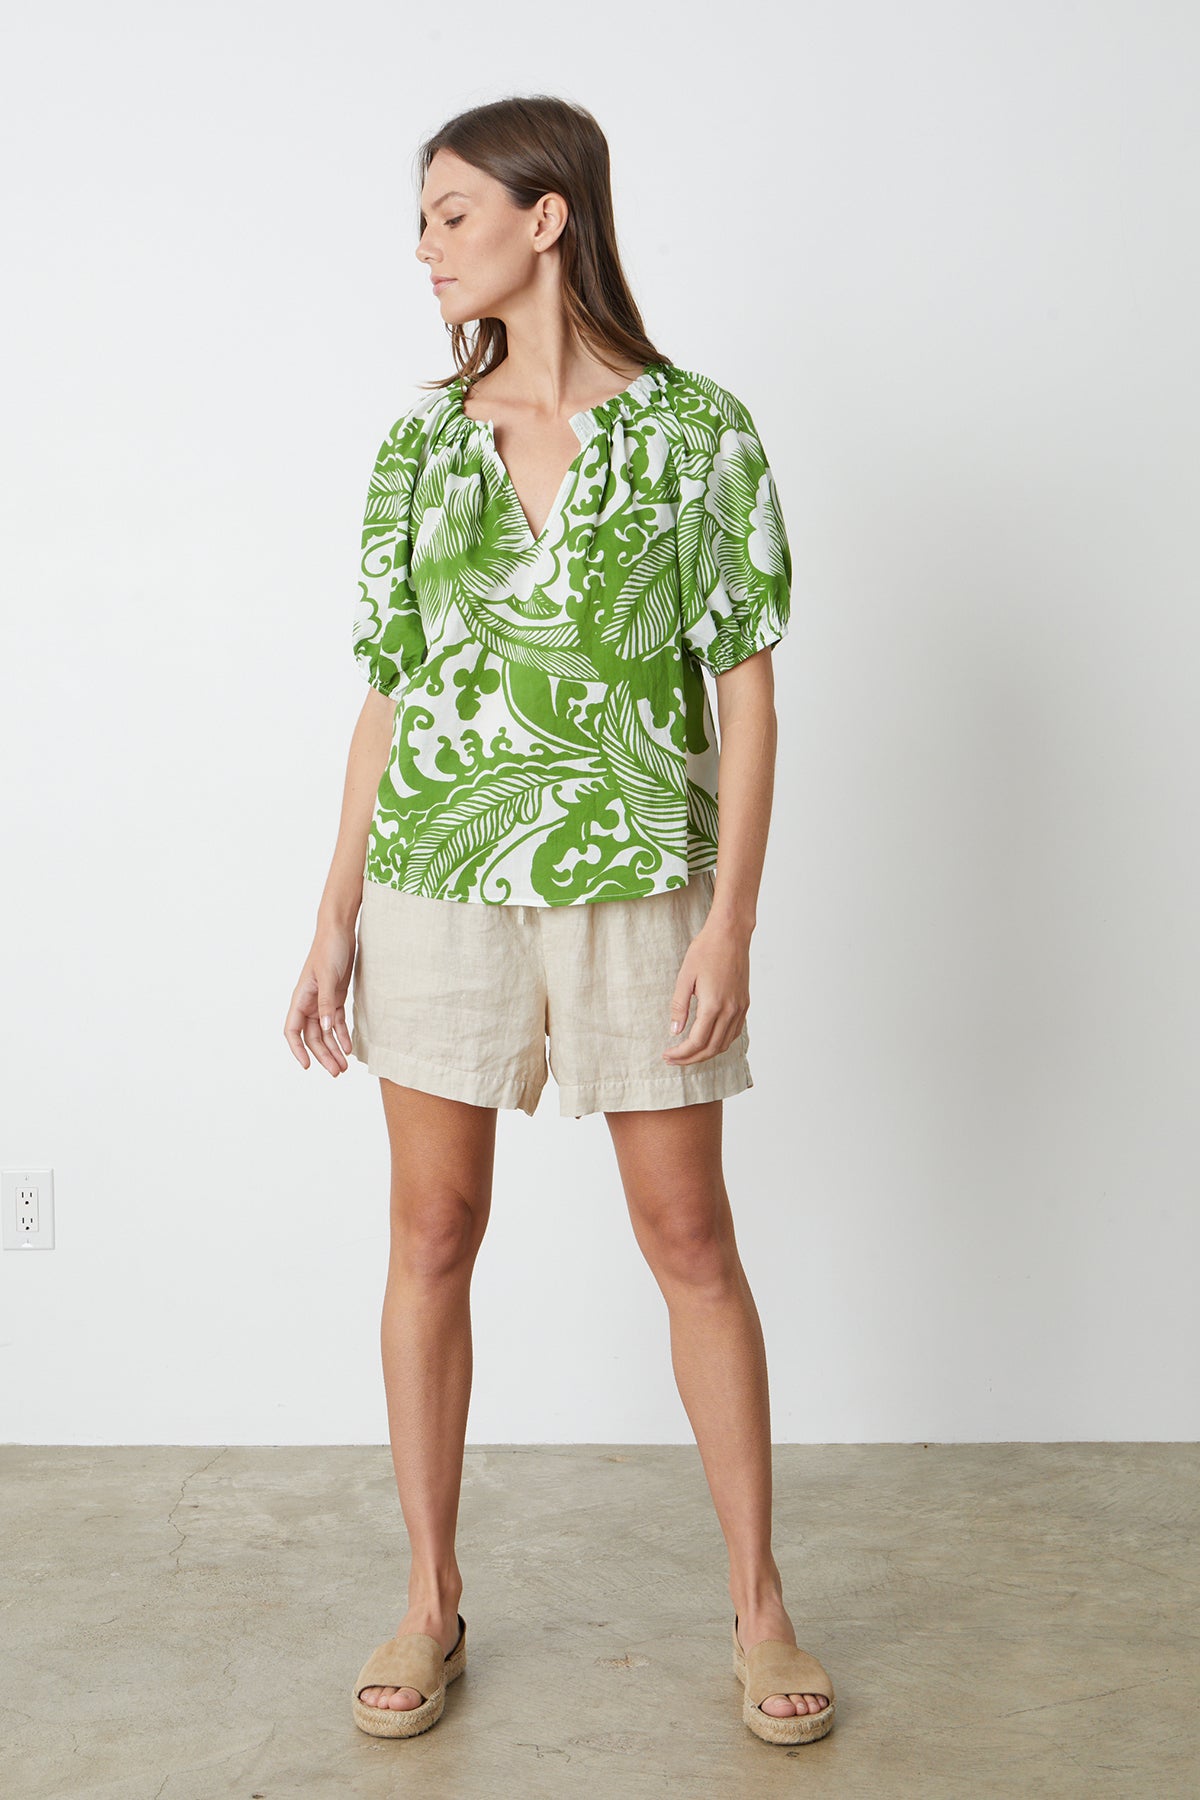 the model is wearing a green ANGELA PRINTED BOHO TOP and shorts by Velvet by Graham & Spencer with Tammy shorts and slides full length front-26342685180097